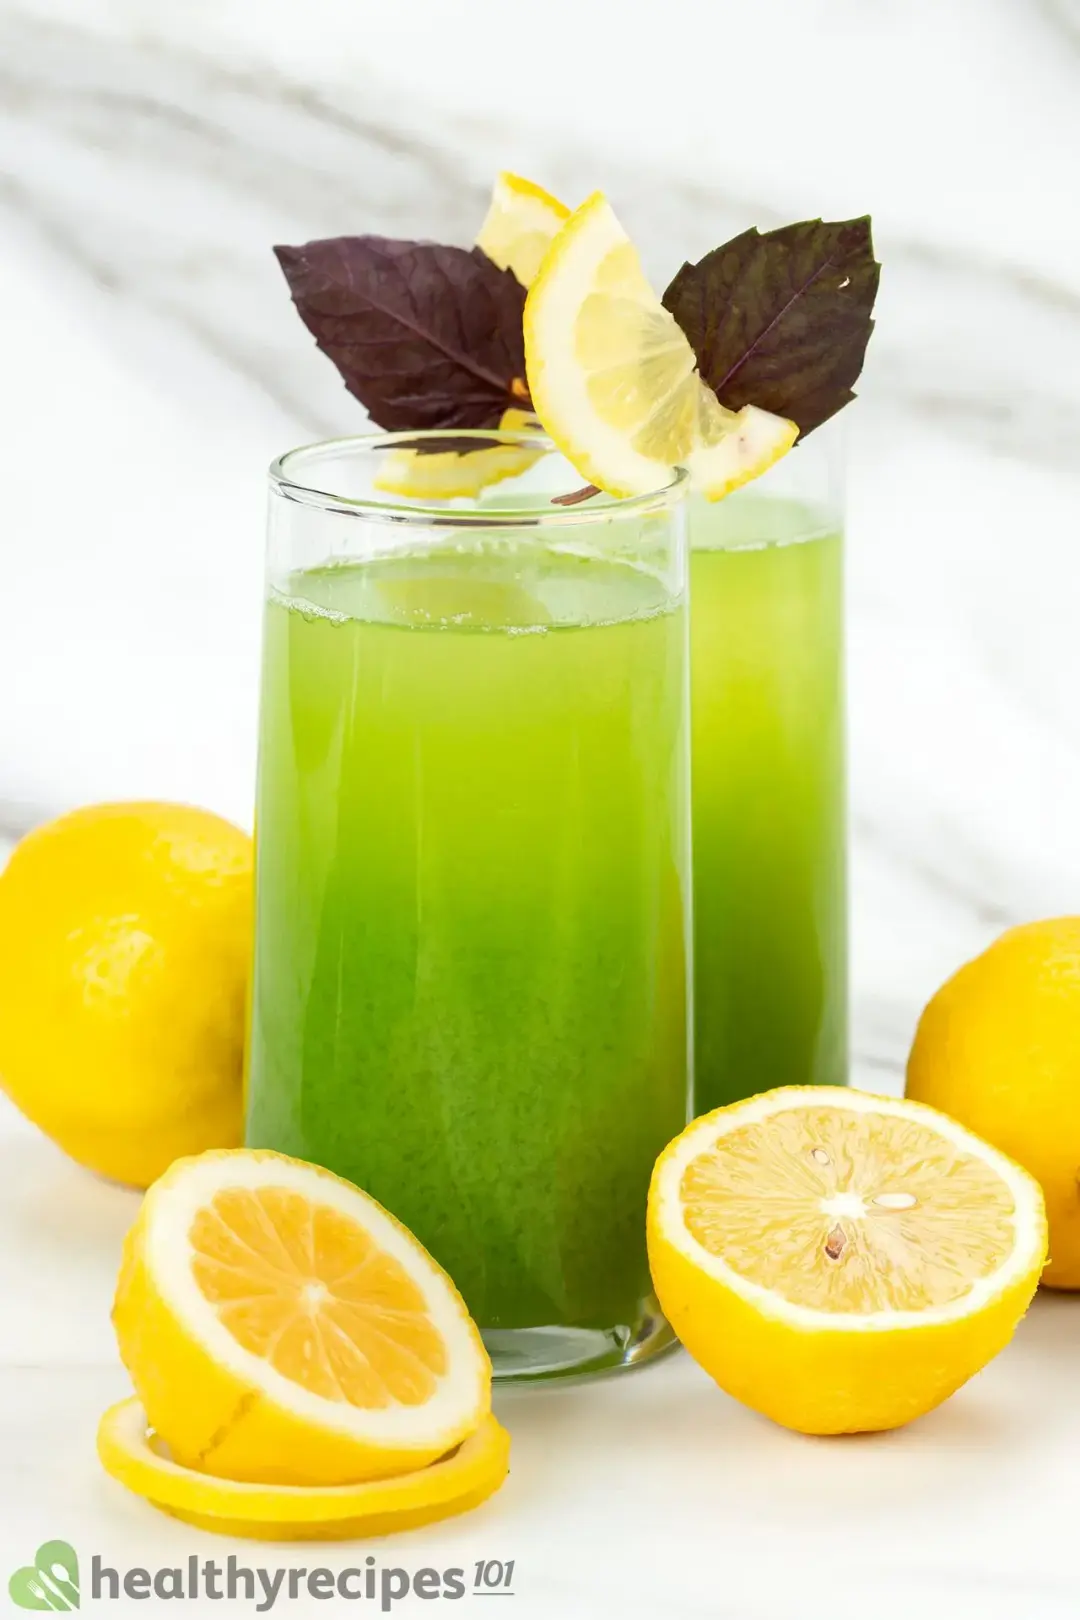 Two tall glasses of cucumber and lemon juice put next to lemon wheels and topped with purple leaves